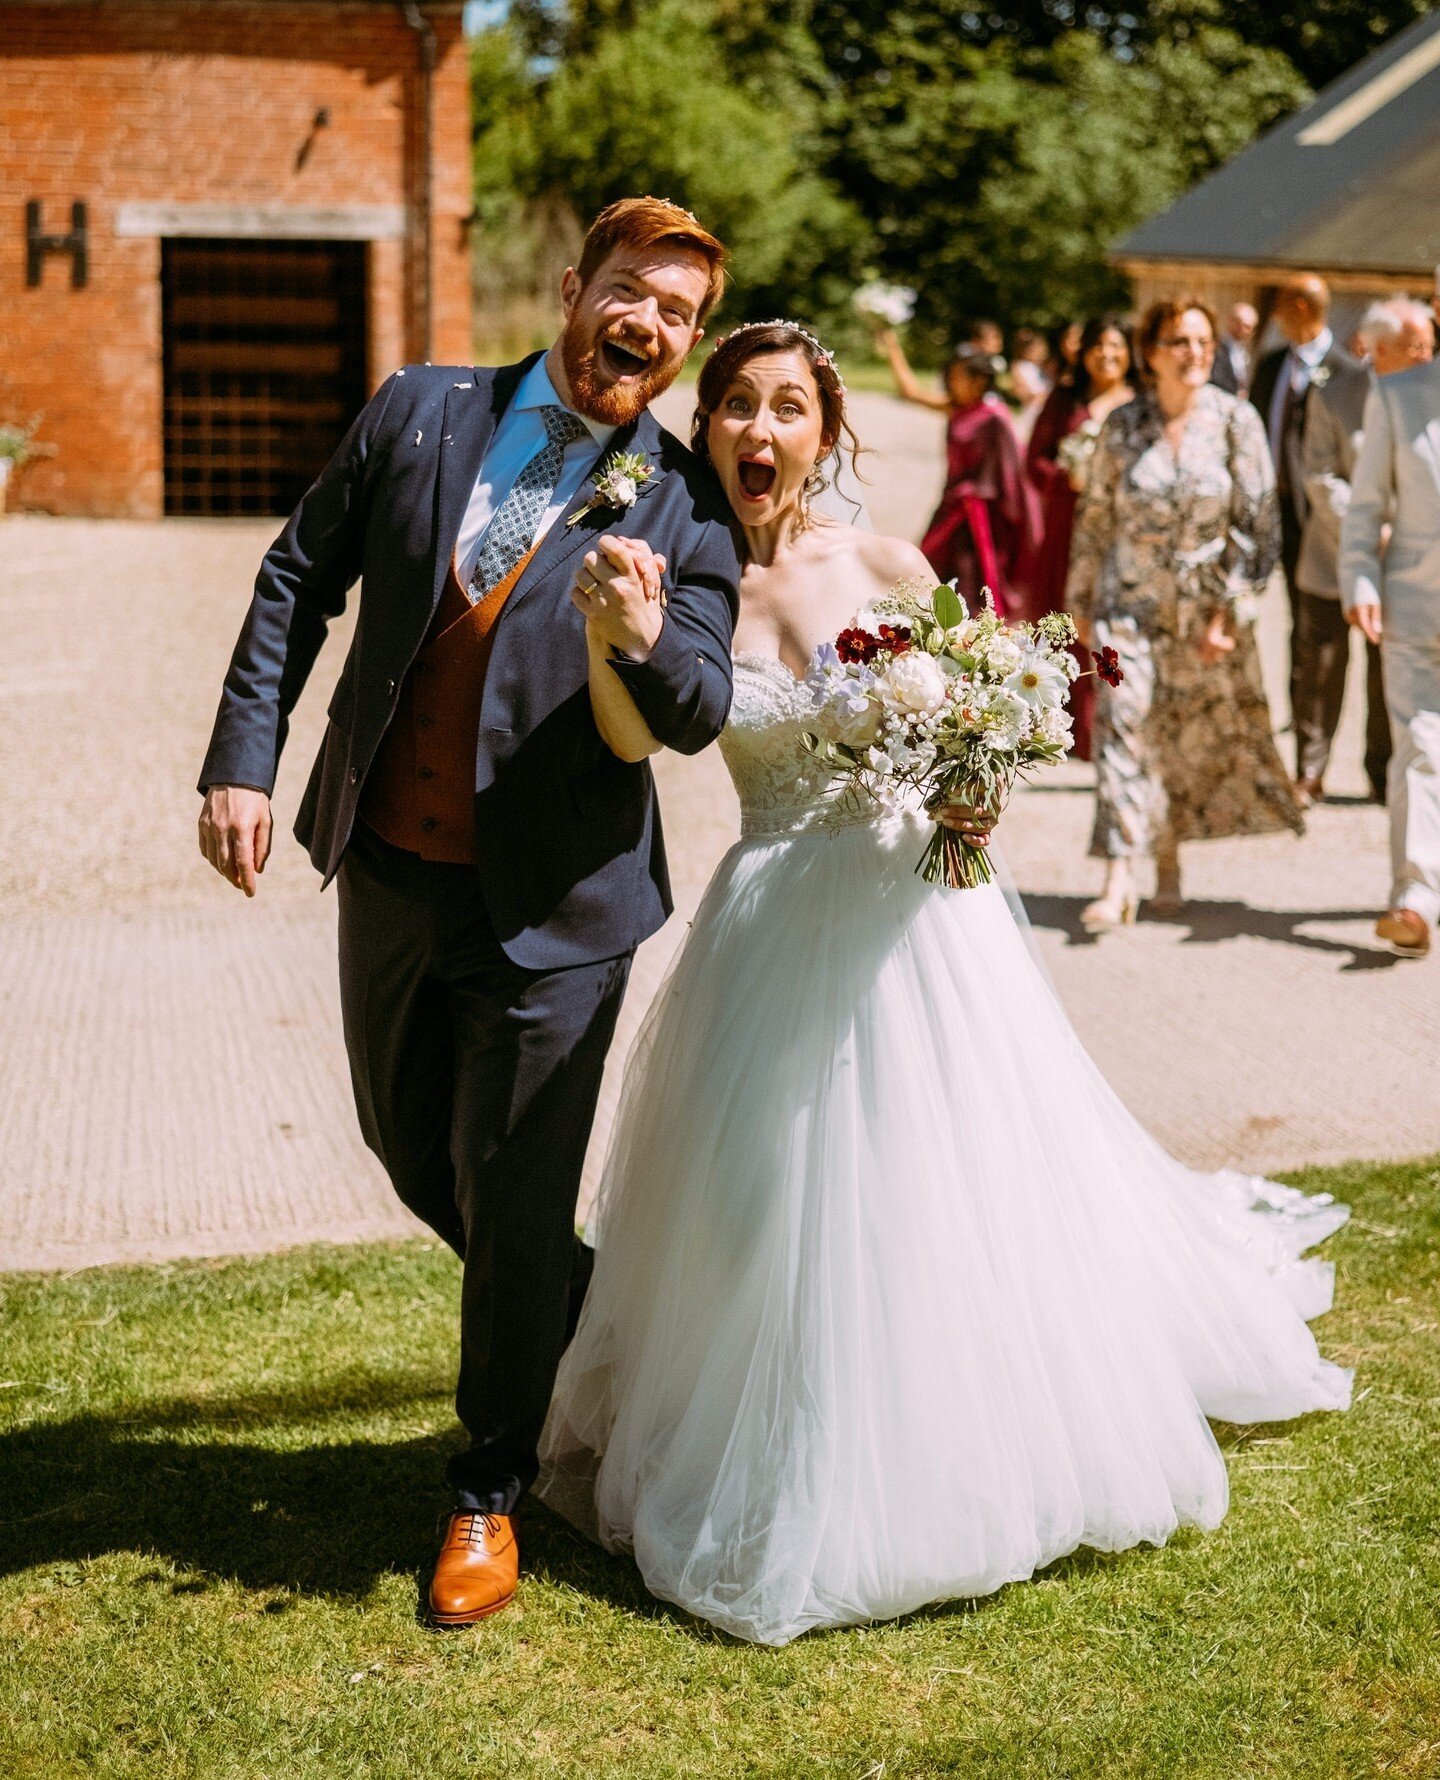 🔥 That Just-Married feeling @the_haybarn_hereford⁠
⁠
If you're looking for a wedding photographer or videographer for 2023 then please get in touch, dates are starting to fill up fast for next summer!⁠
⁠
👉️ www.colinnichollsphotography.com⁠
⁠
#here